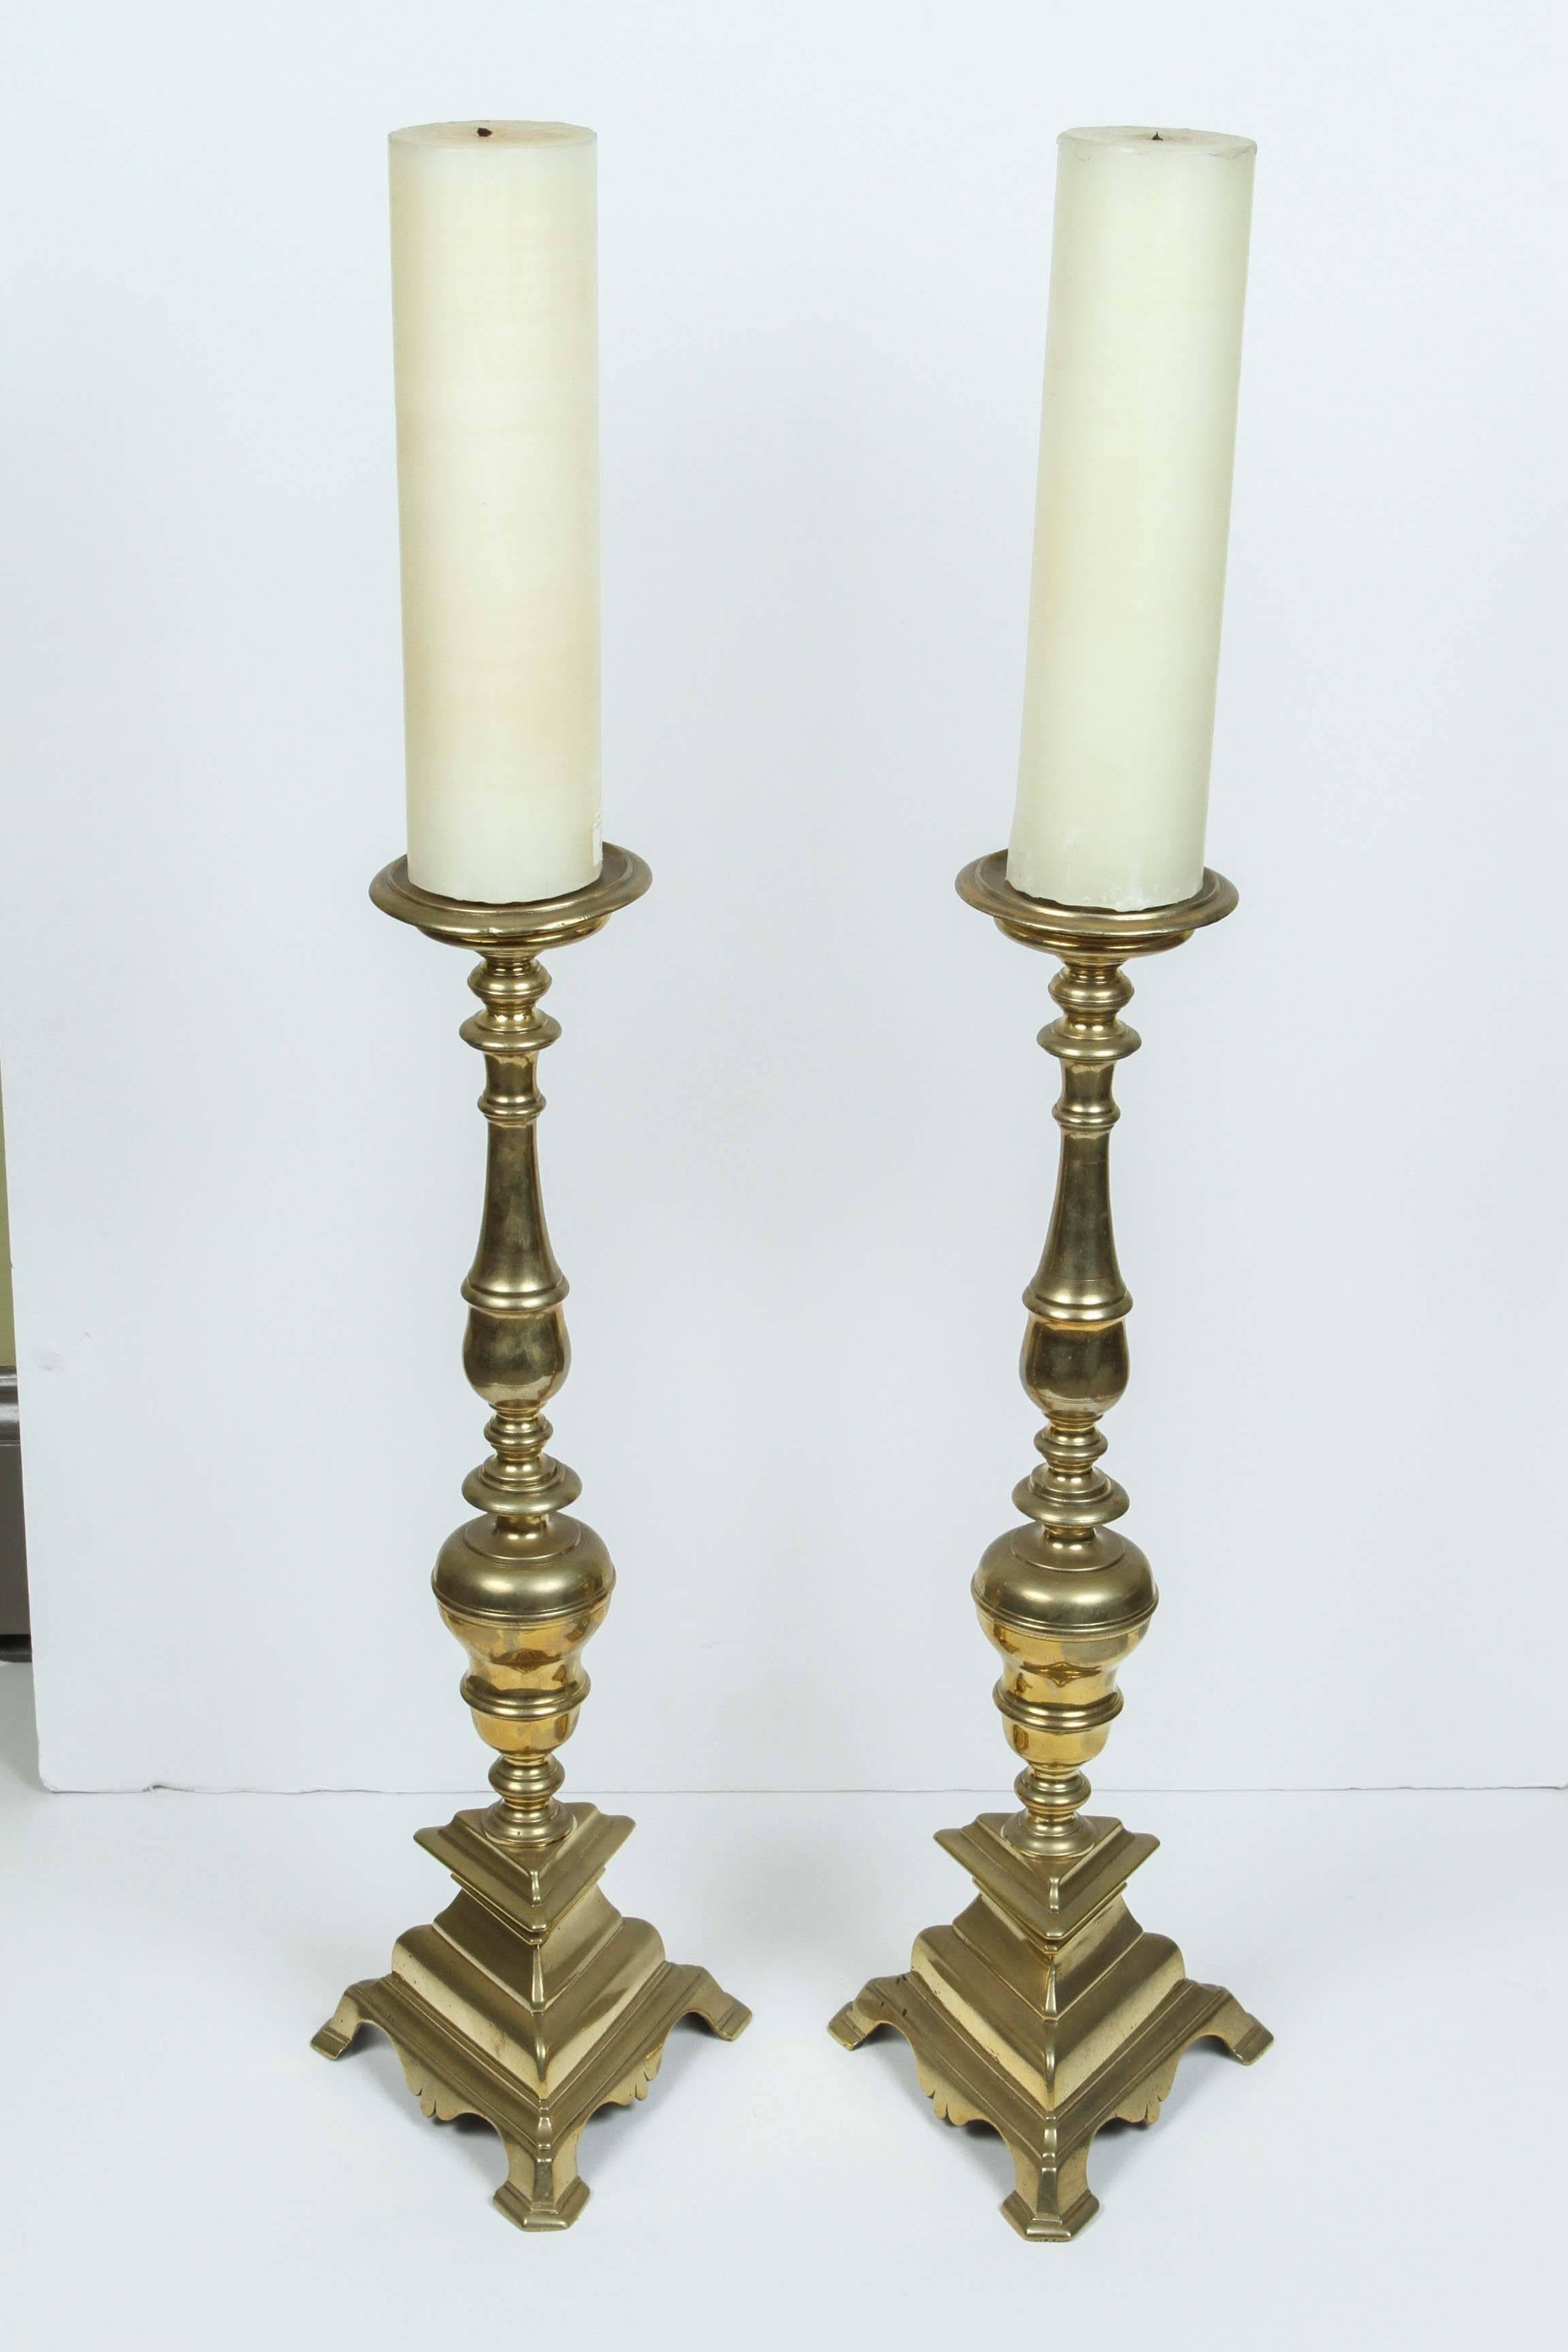 A pair of 18th century Italian brass prickets sticks from Estate of Bob Hope.